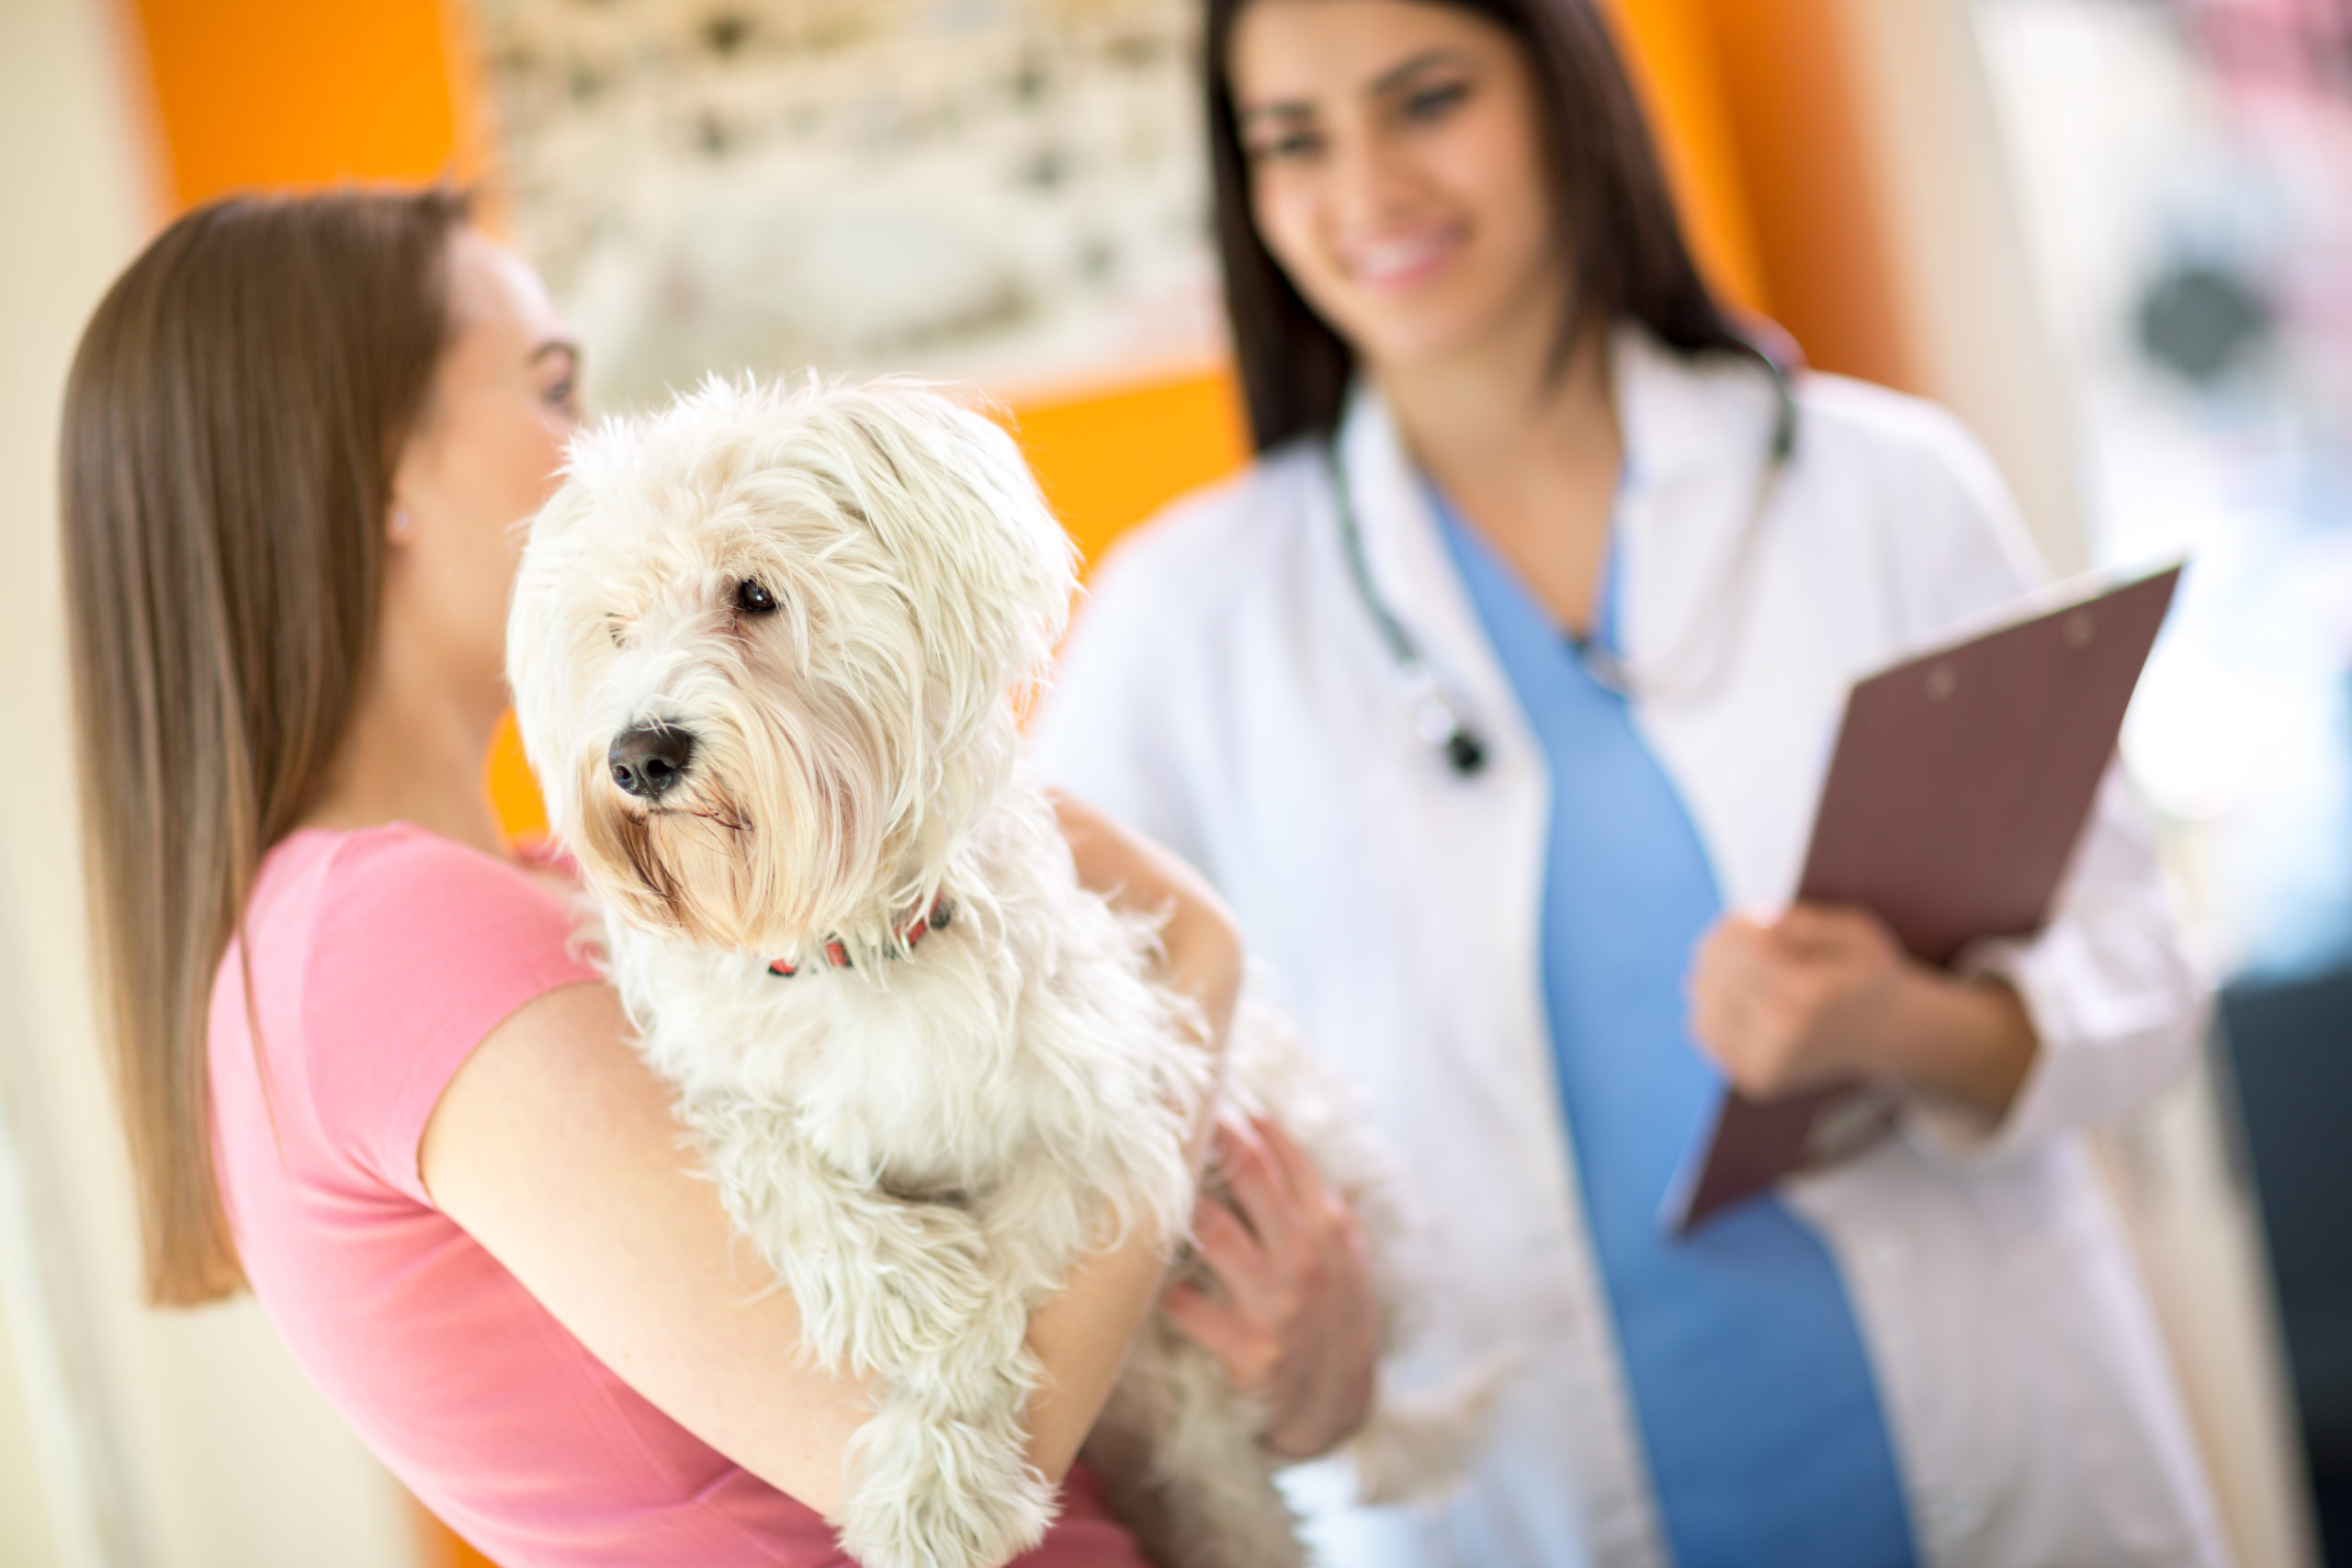 Signs You Should Take Your Dog to the Vet